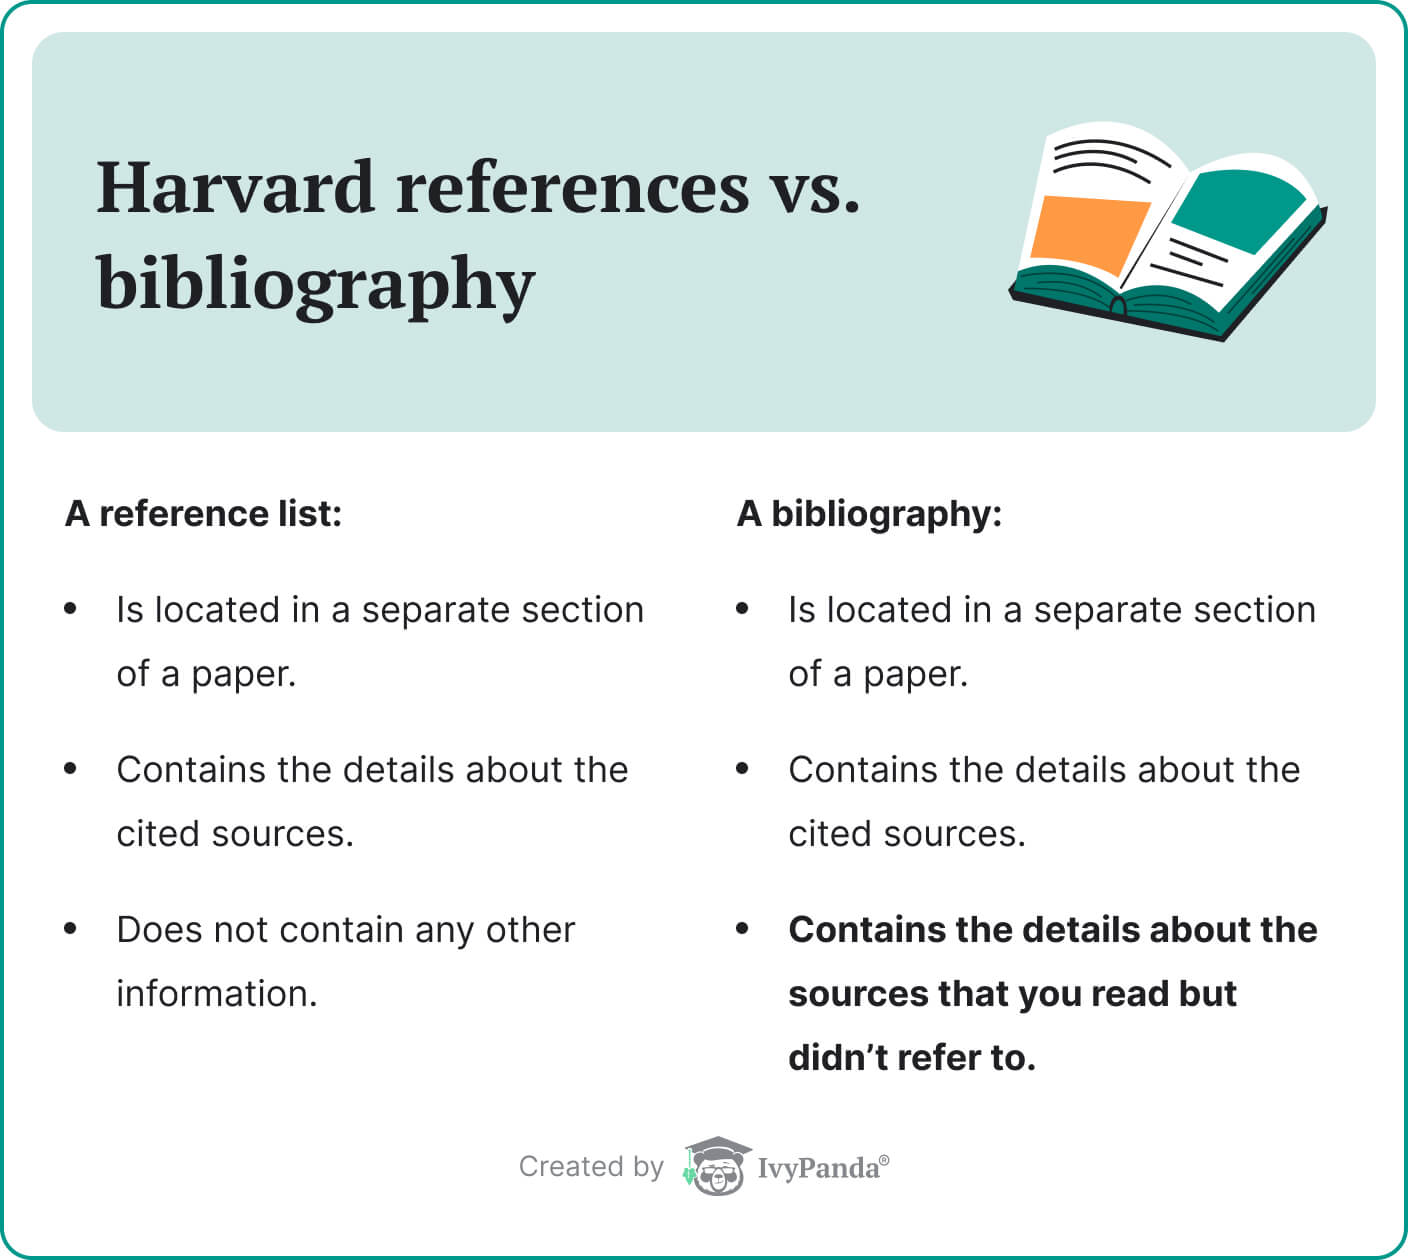 The picture compares a Harvard reference list to a bibliography.